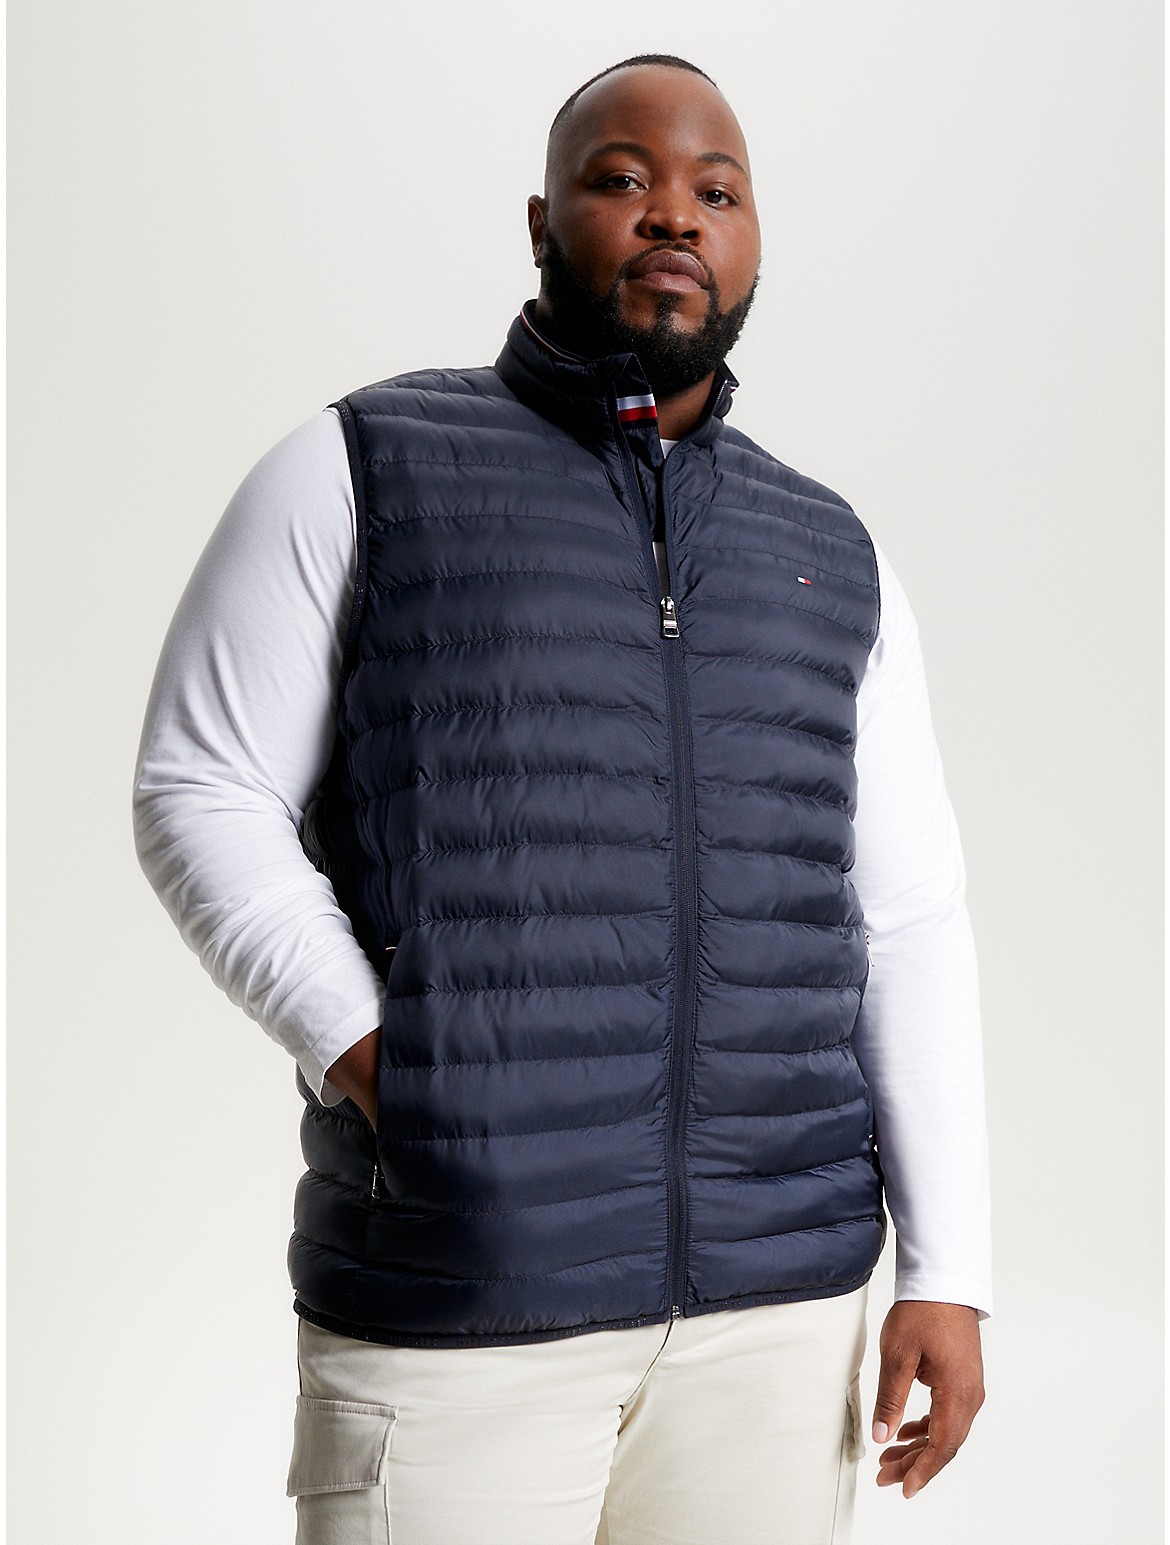 Tommy Hilfiger Men's Big and Tall Recycled Packable Vest - Blue - XXXL